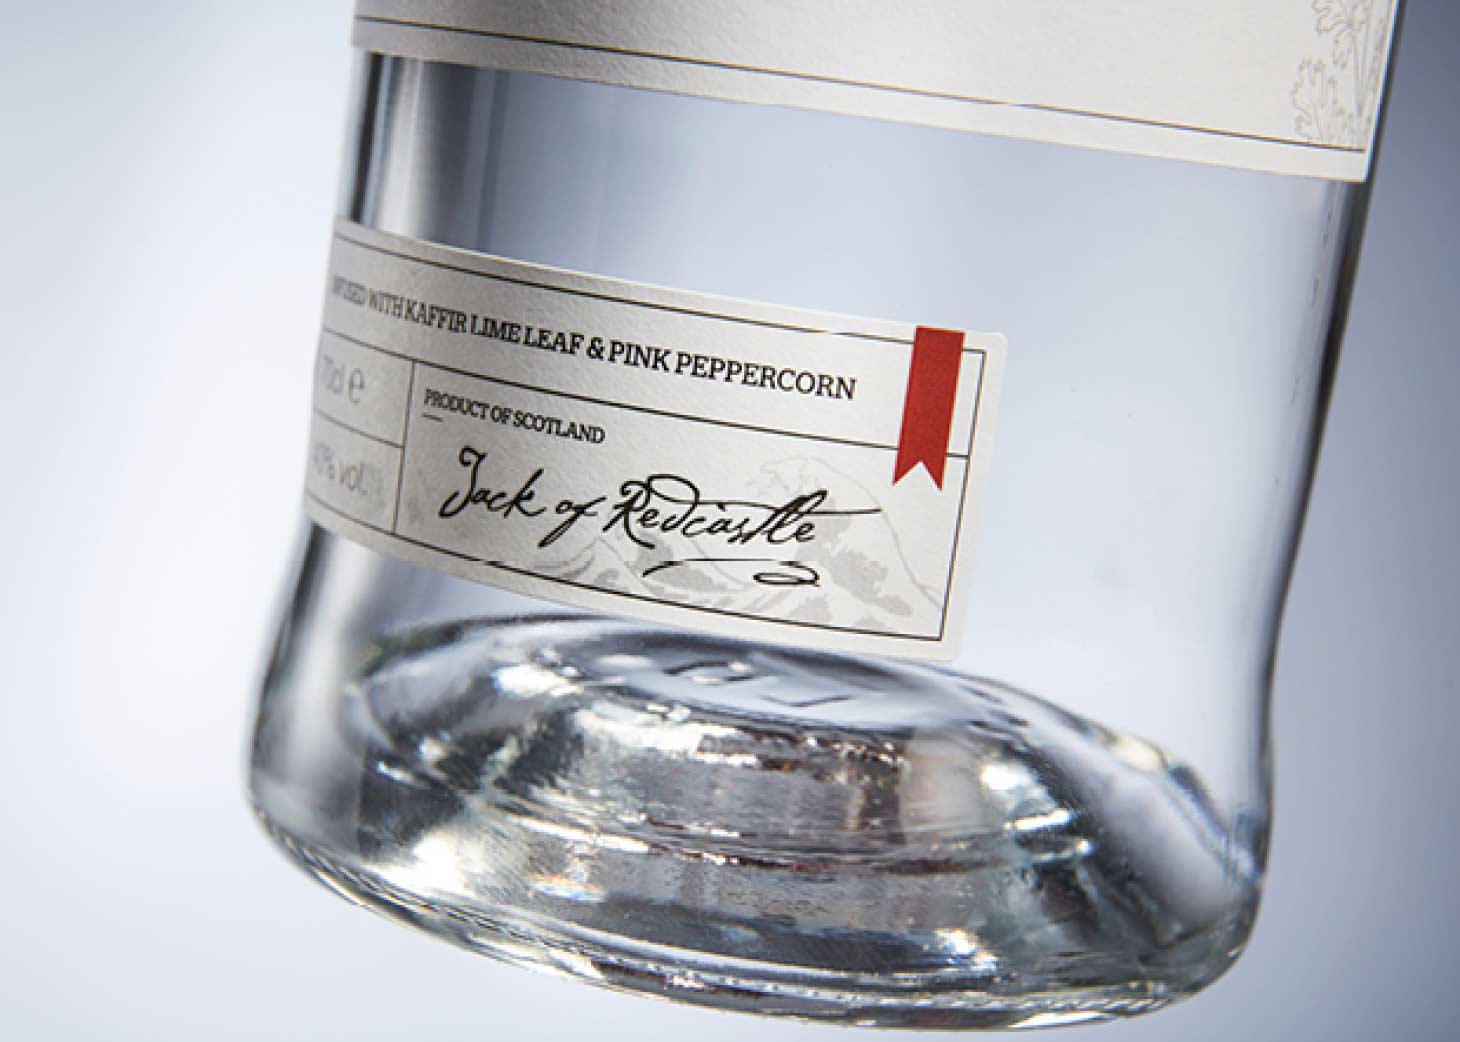 Zoomed-in gin bottle label, showing a signature "Jack of Redcastle".